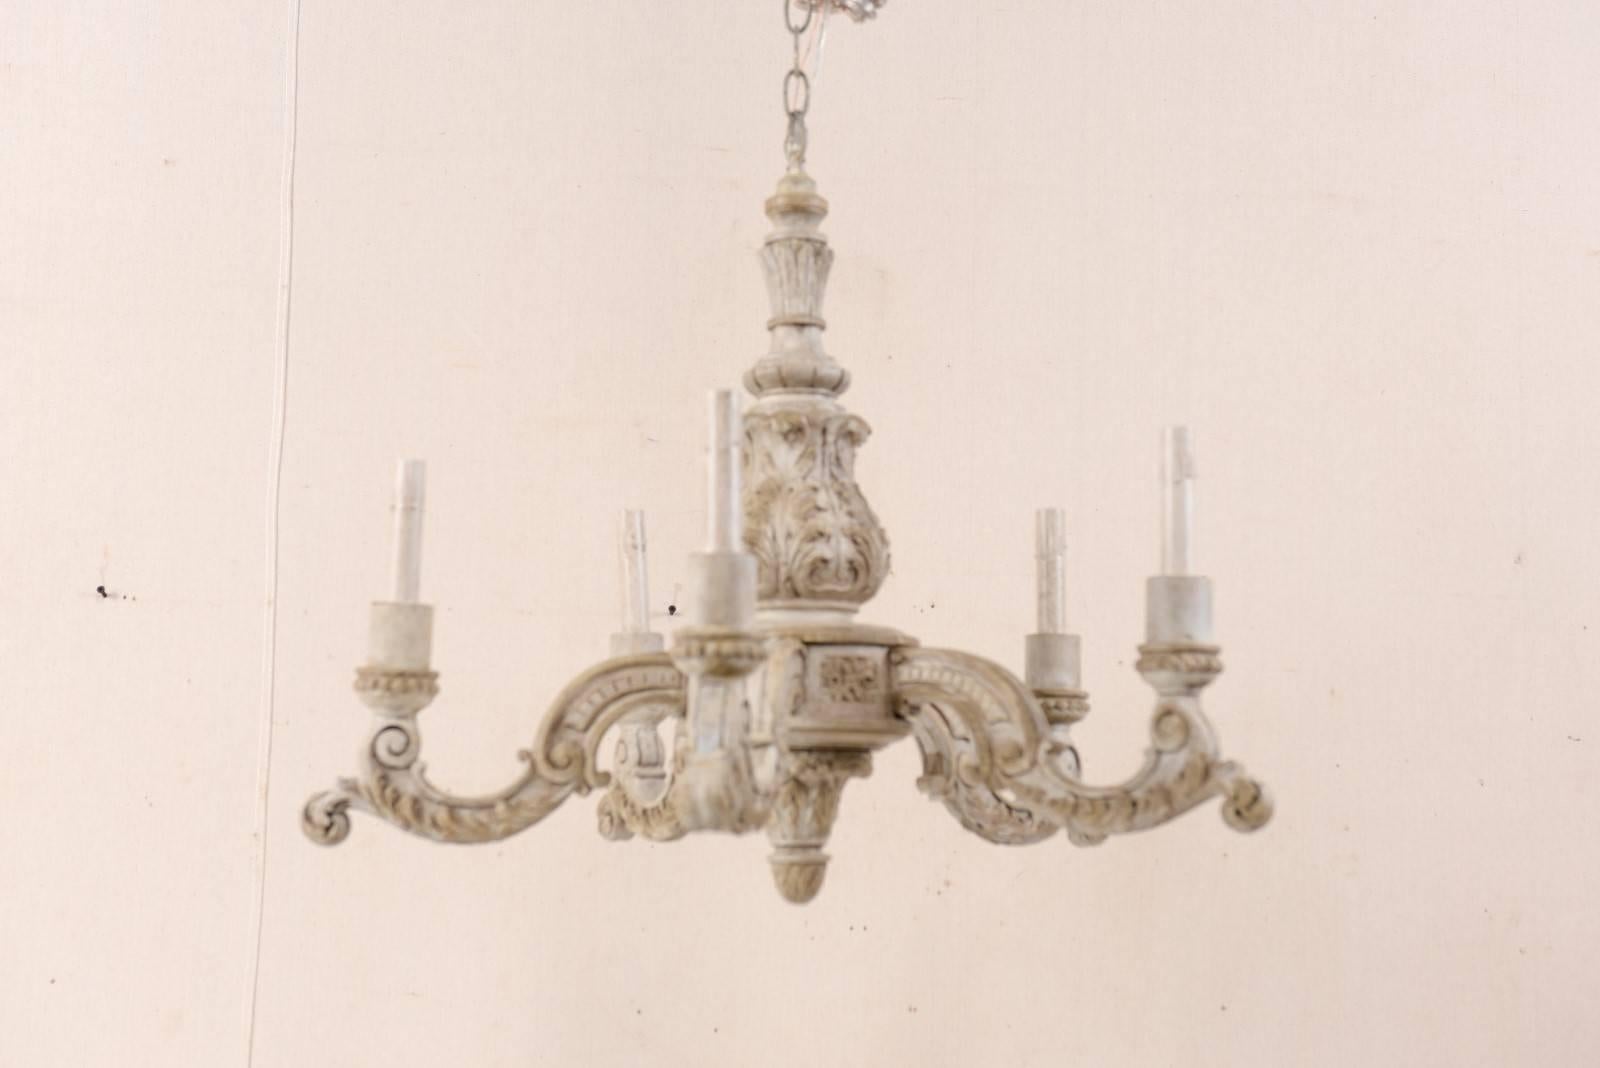 A French mid-20th century carved wood six-light chandelier. This lovely French chandelier from the mid-20th century features a curvaceously carved central column in acanthus leaf motif, with six scrolled arms emerging outward that are each adorned